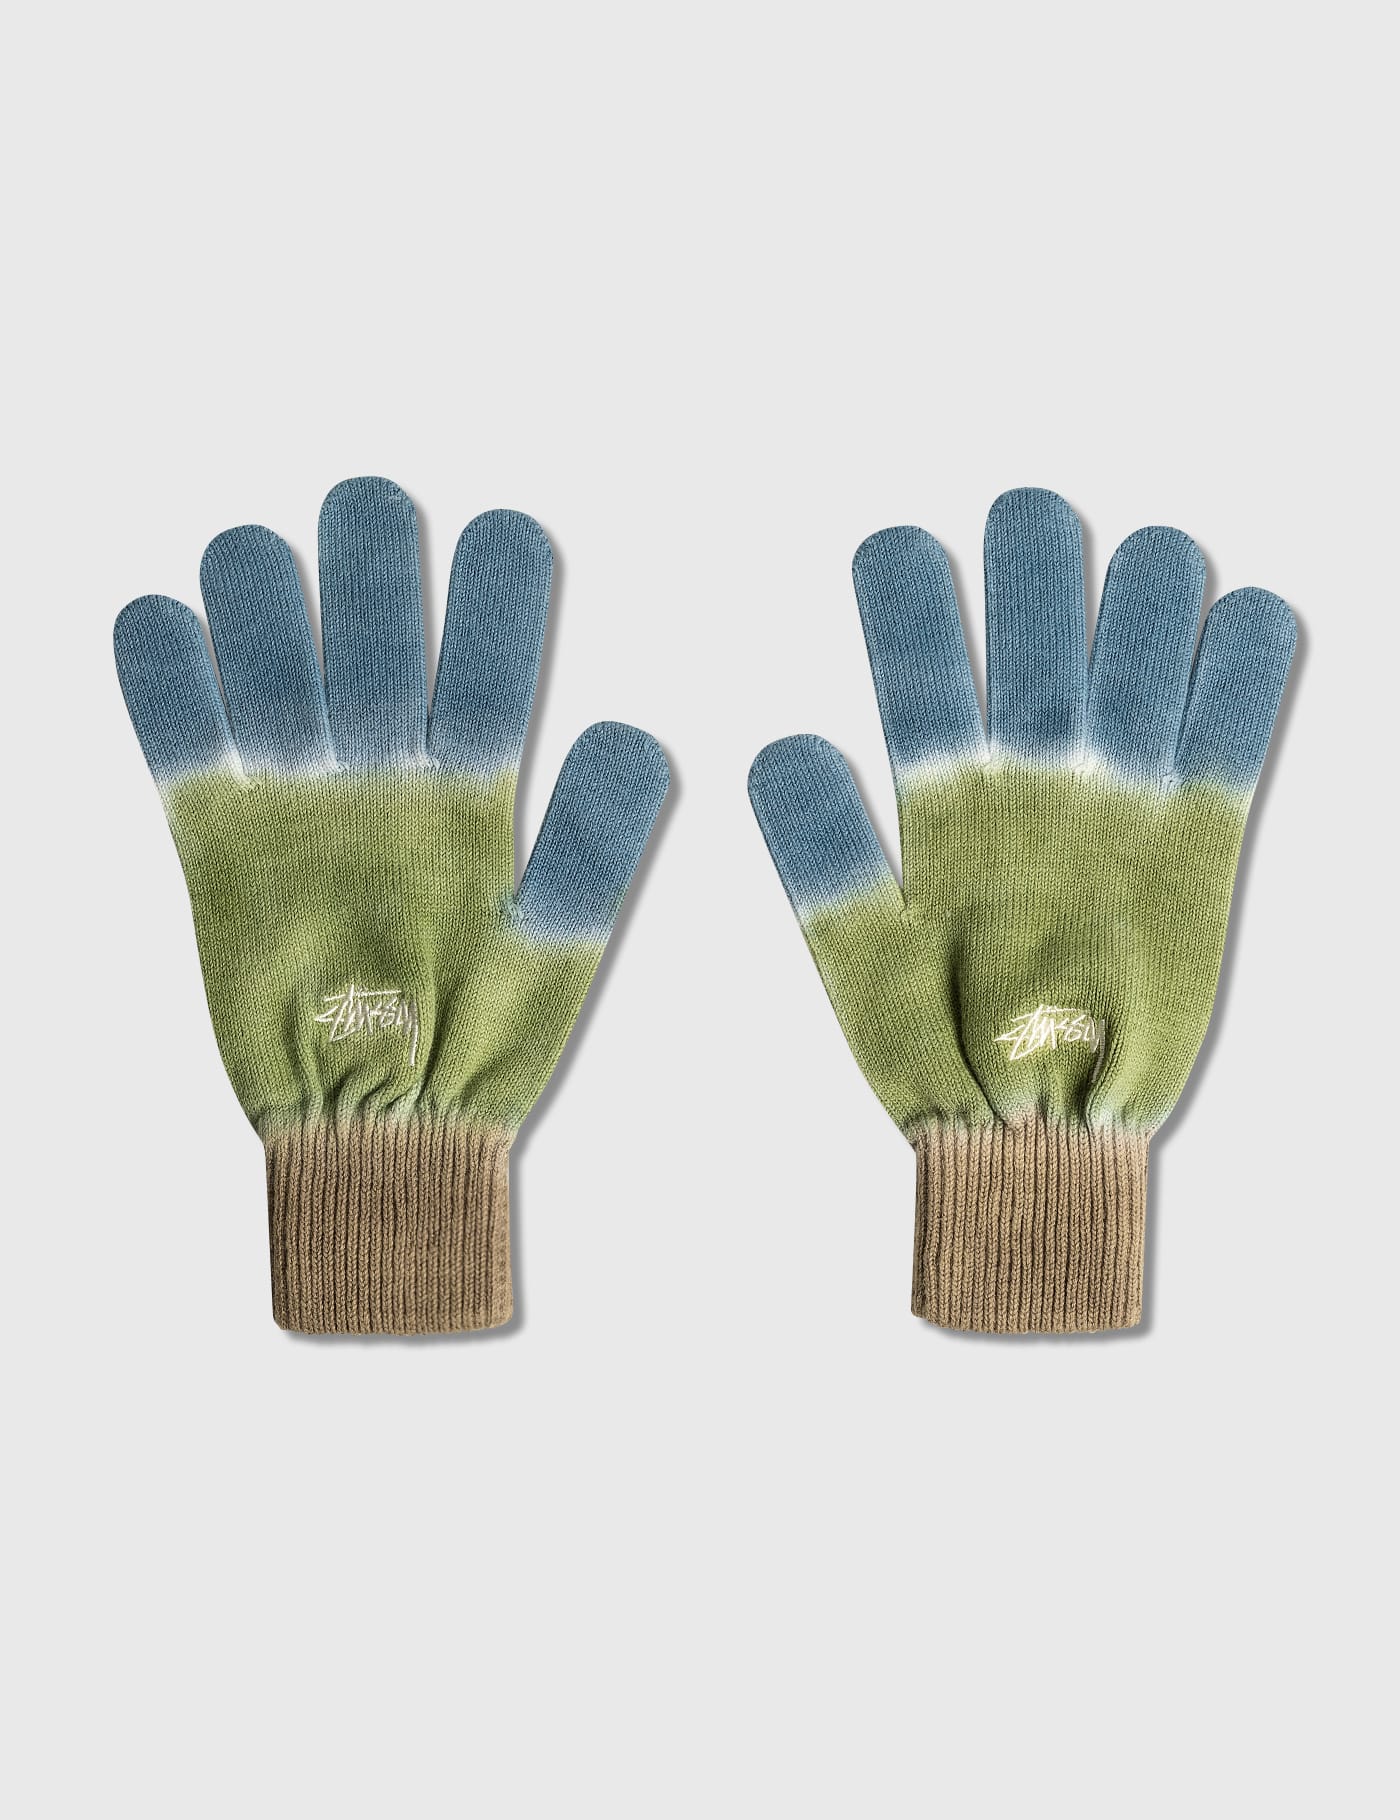 Stüssy - Earth Day Knit Gloves | HBX - Globally Curated Fashion 